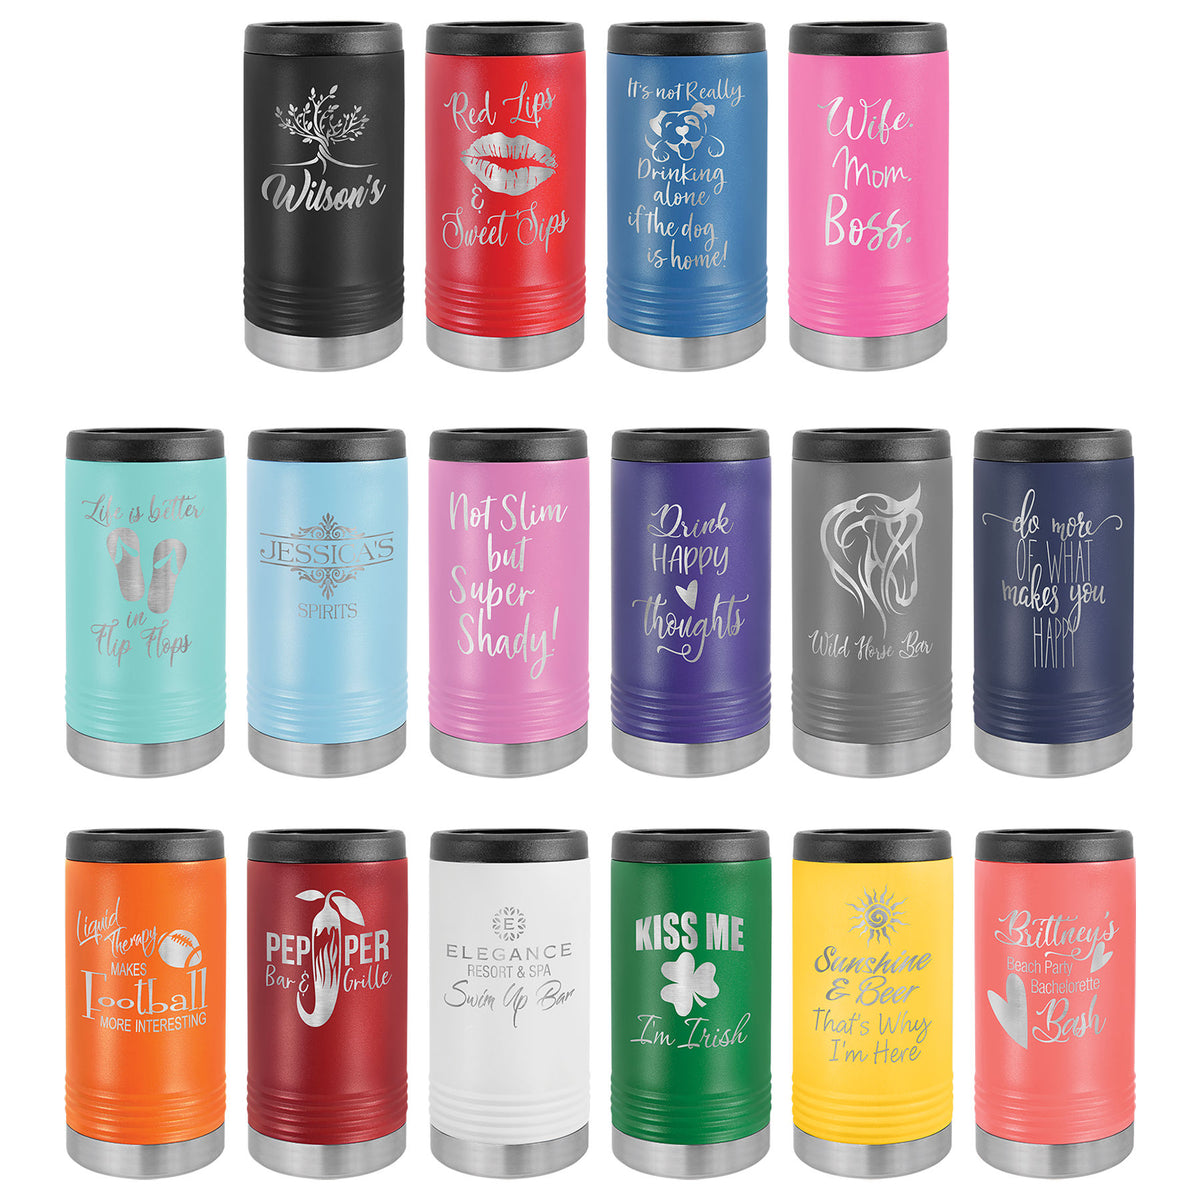 Maroon Insulated Slim Can Koozies - Customized with YOUR design!